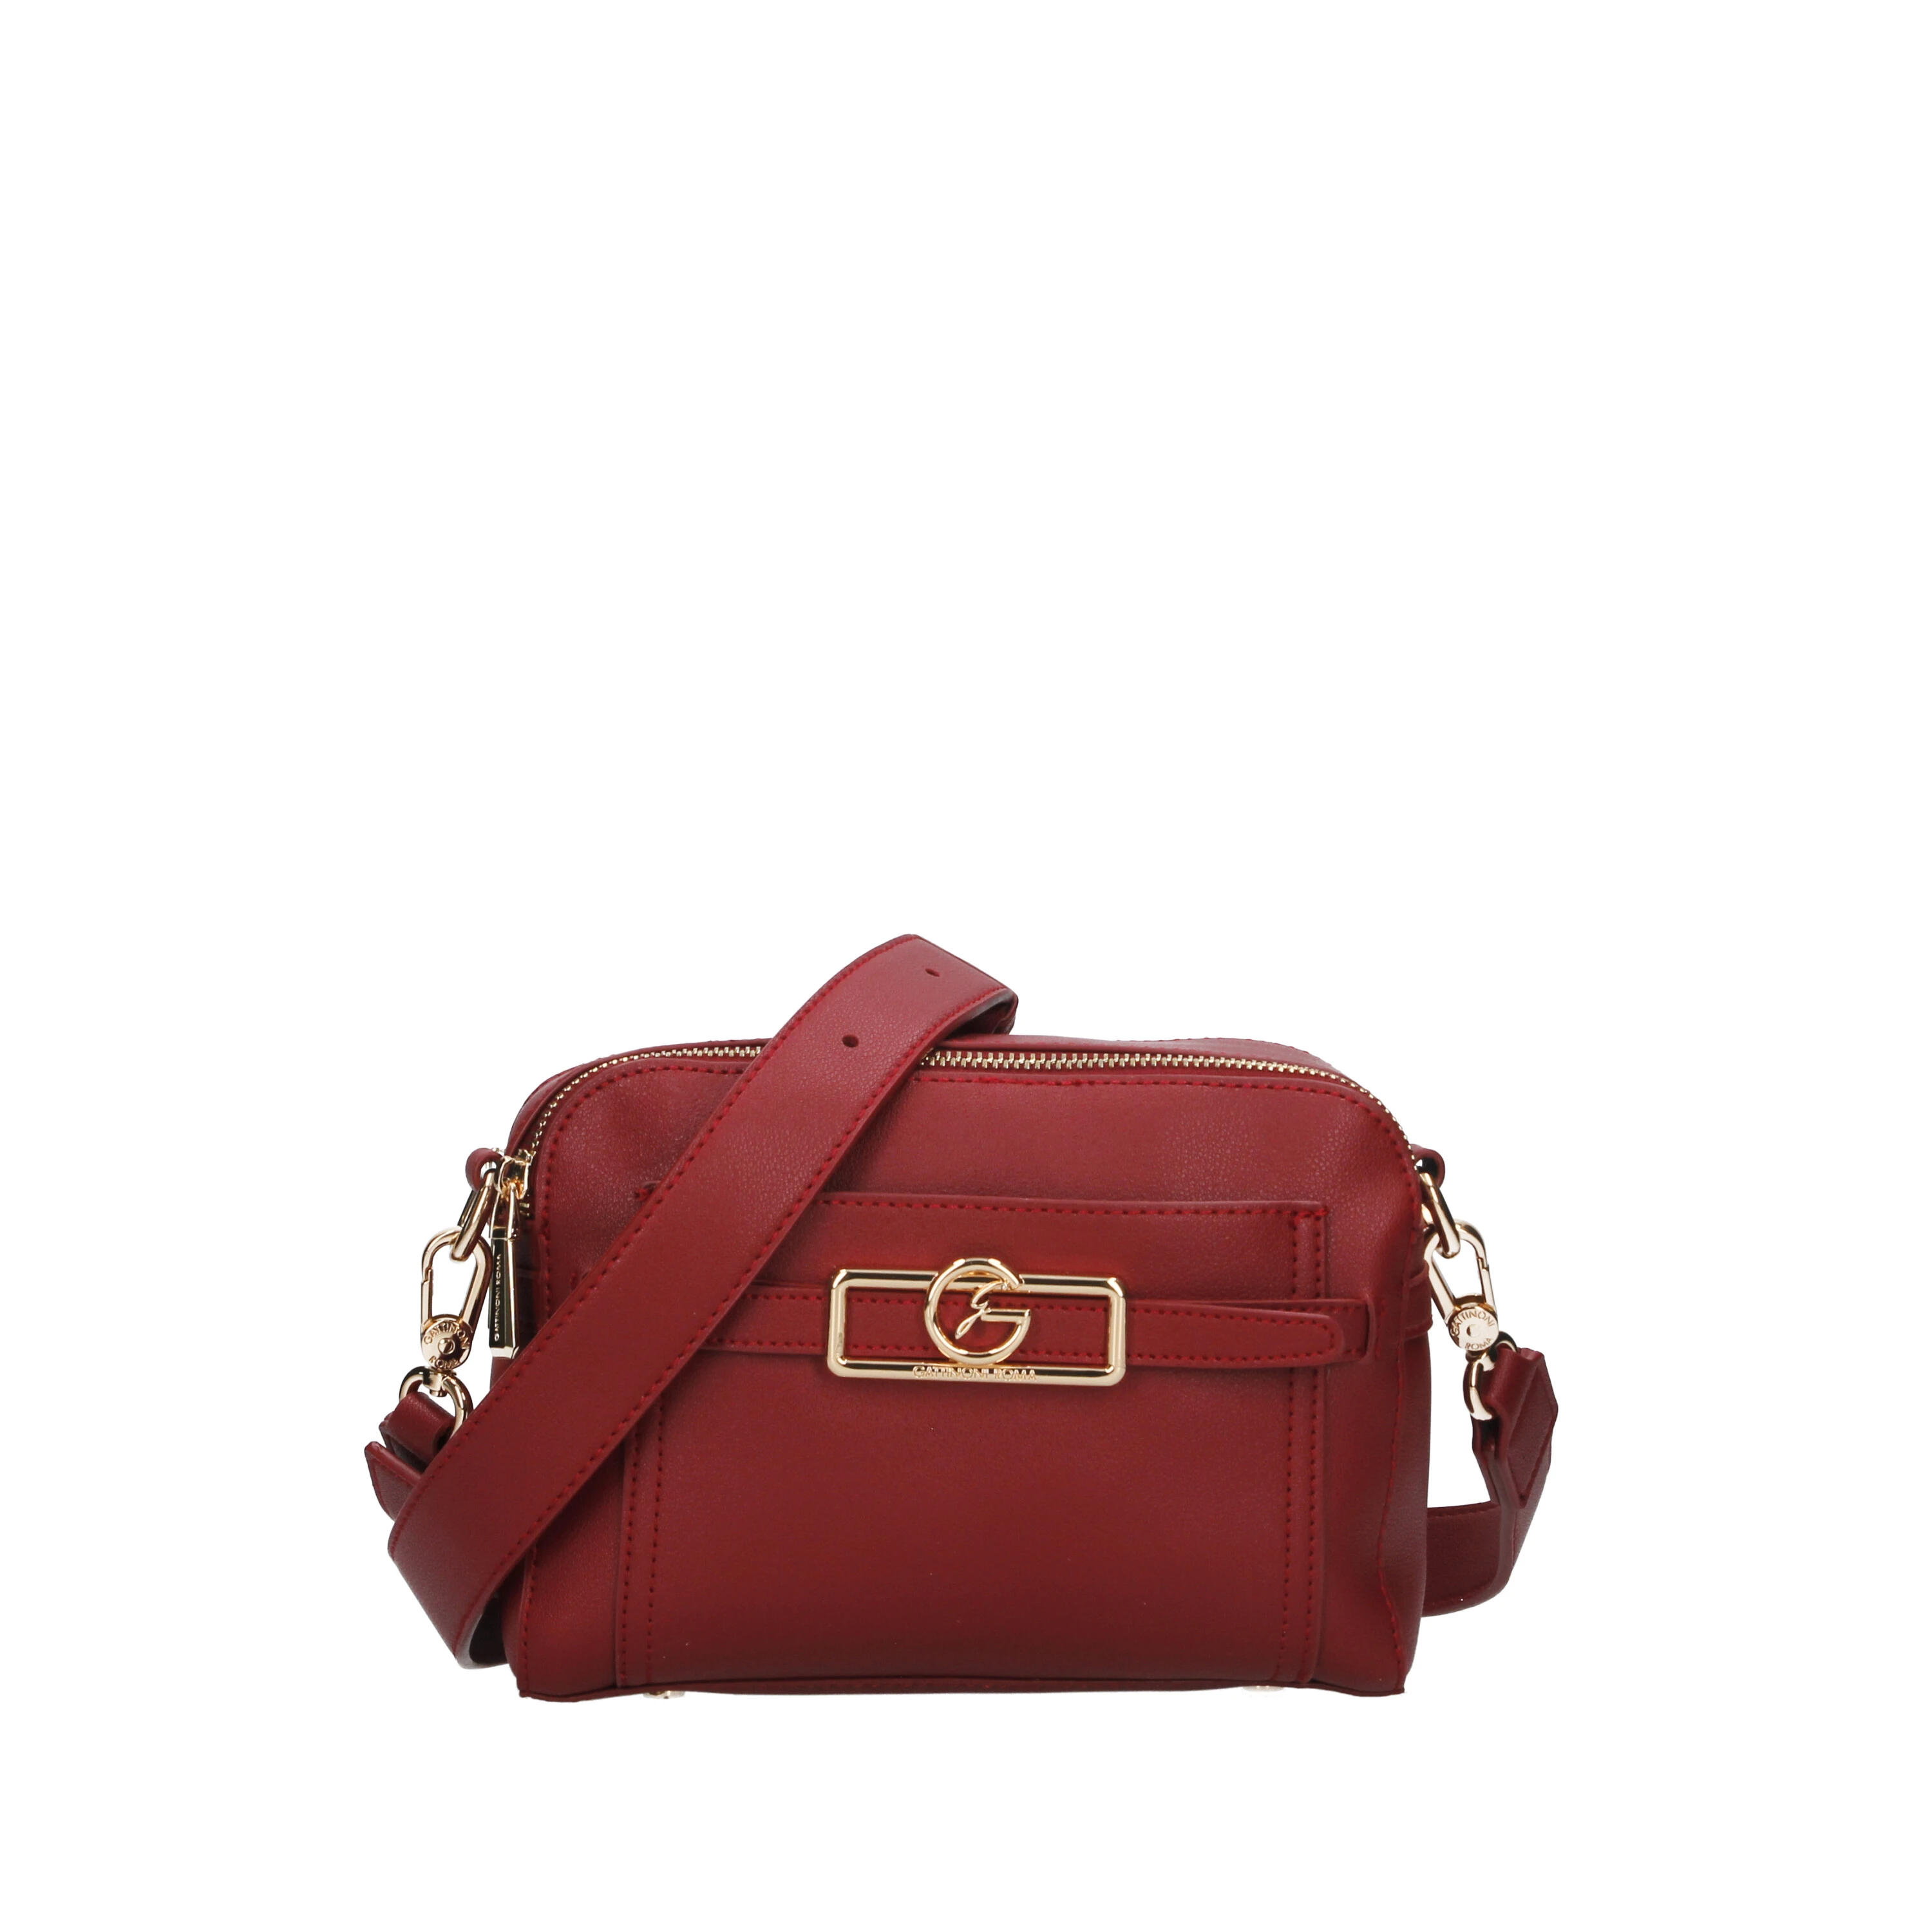 BORSA A TRACOLLA LADY SQUARED IN ECOPELLE DONNA BORDEAUX